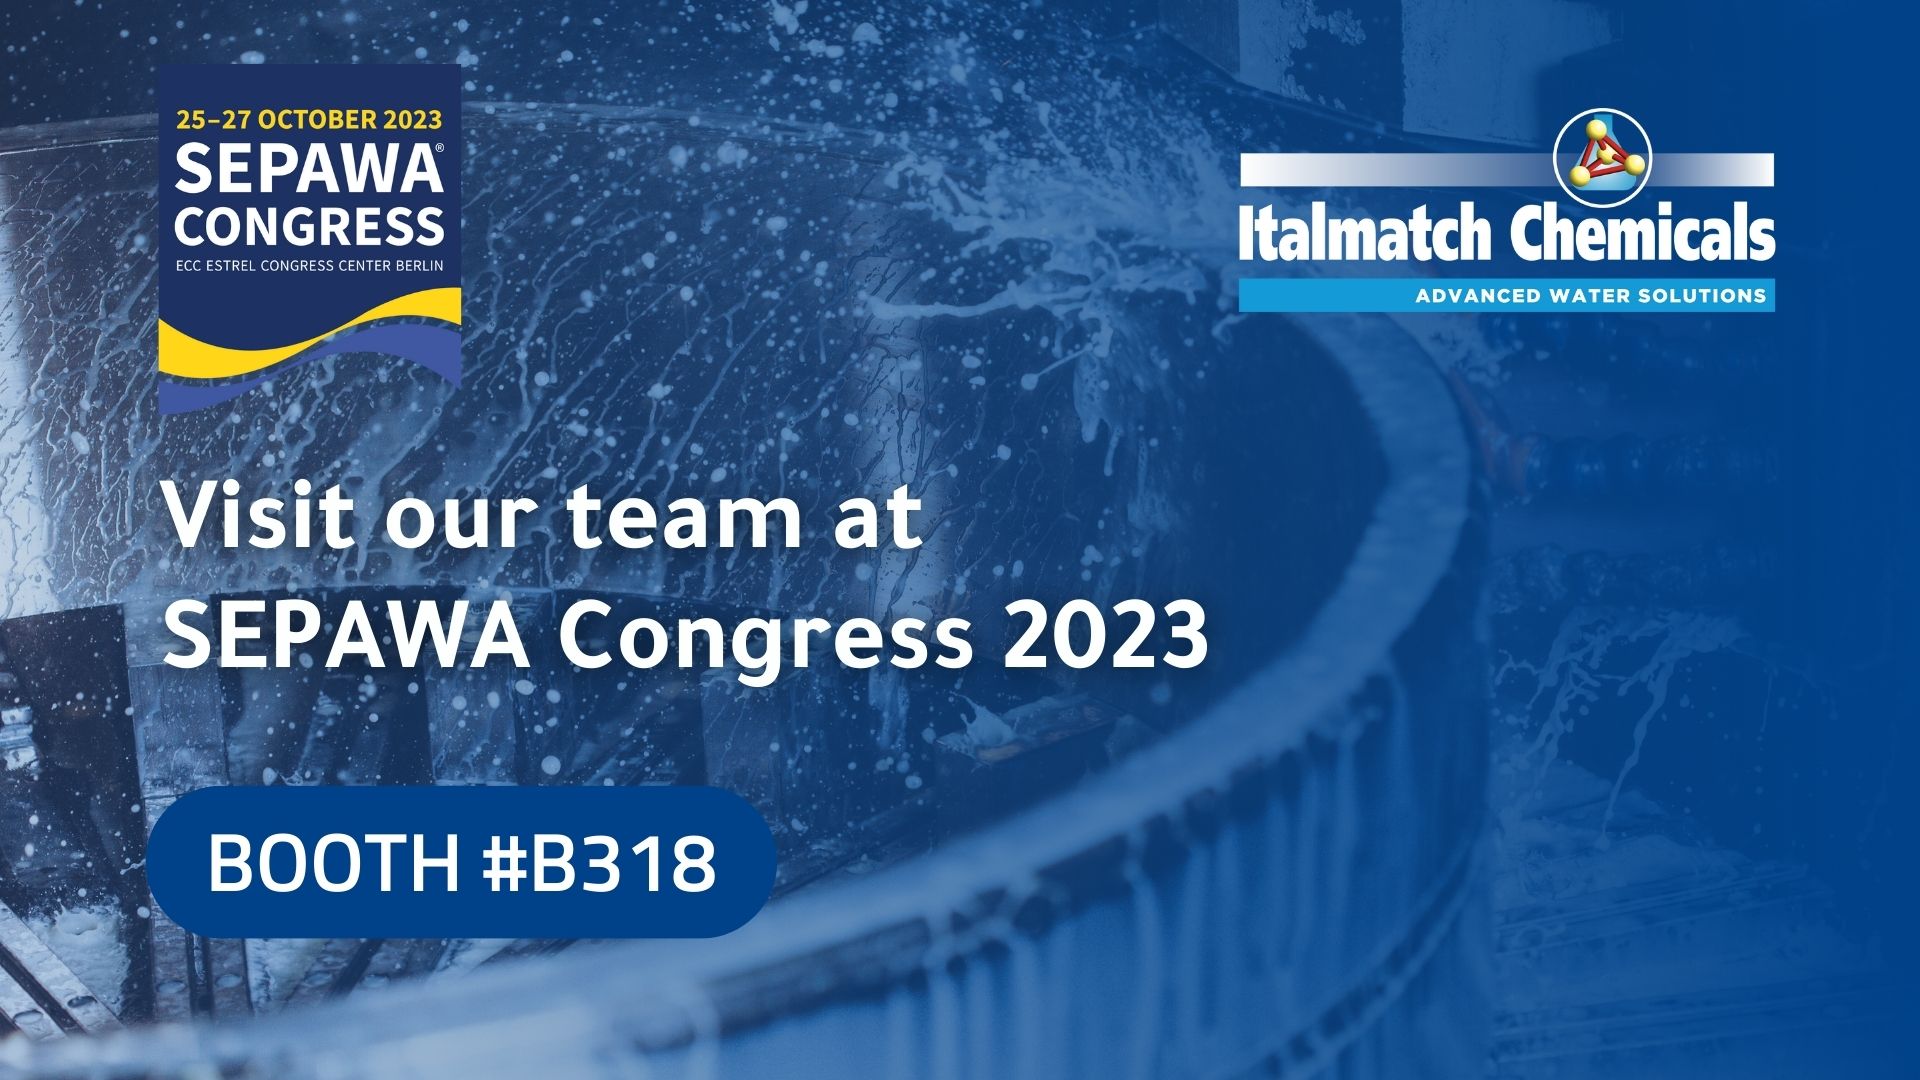 SEPAWA Congress 2023_Italmatch Chemicals Advanced Water Solutions_main picture